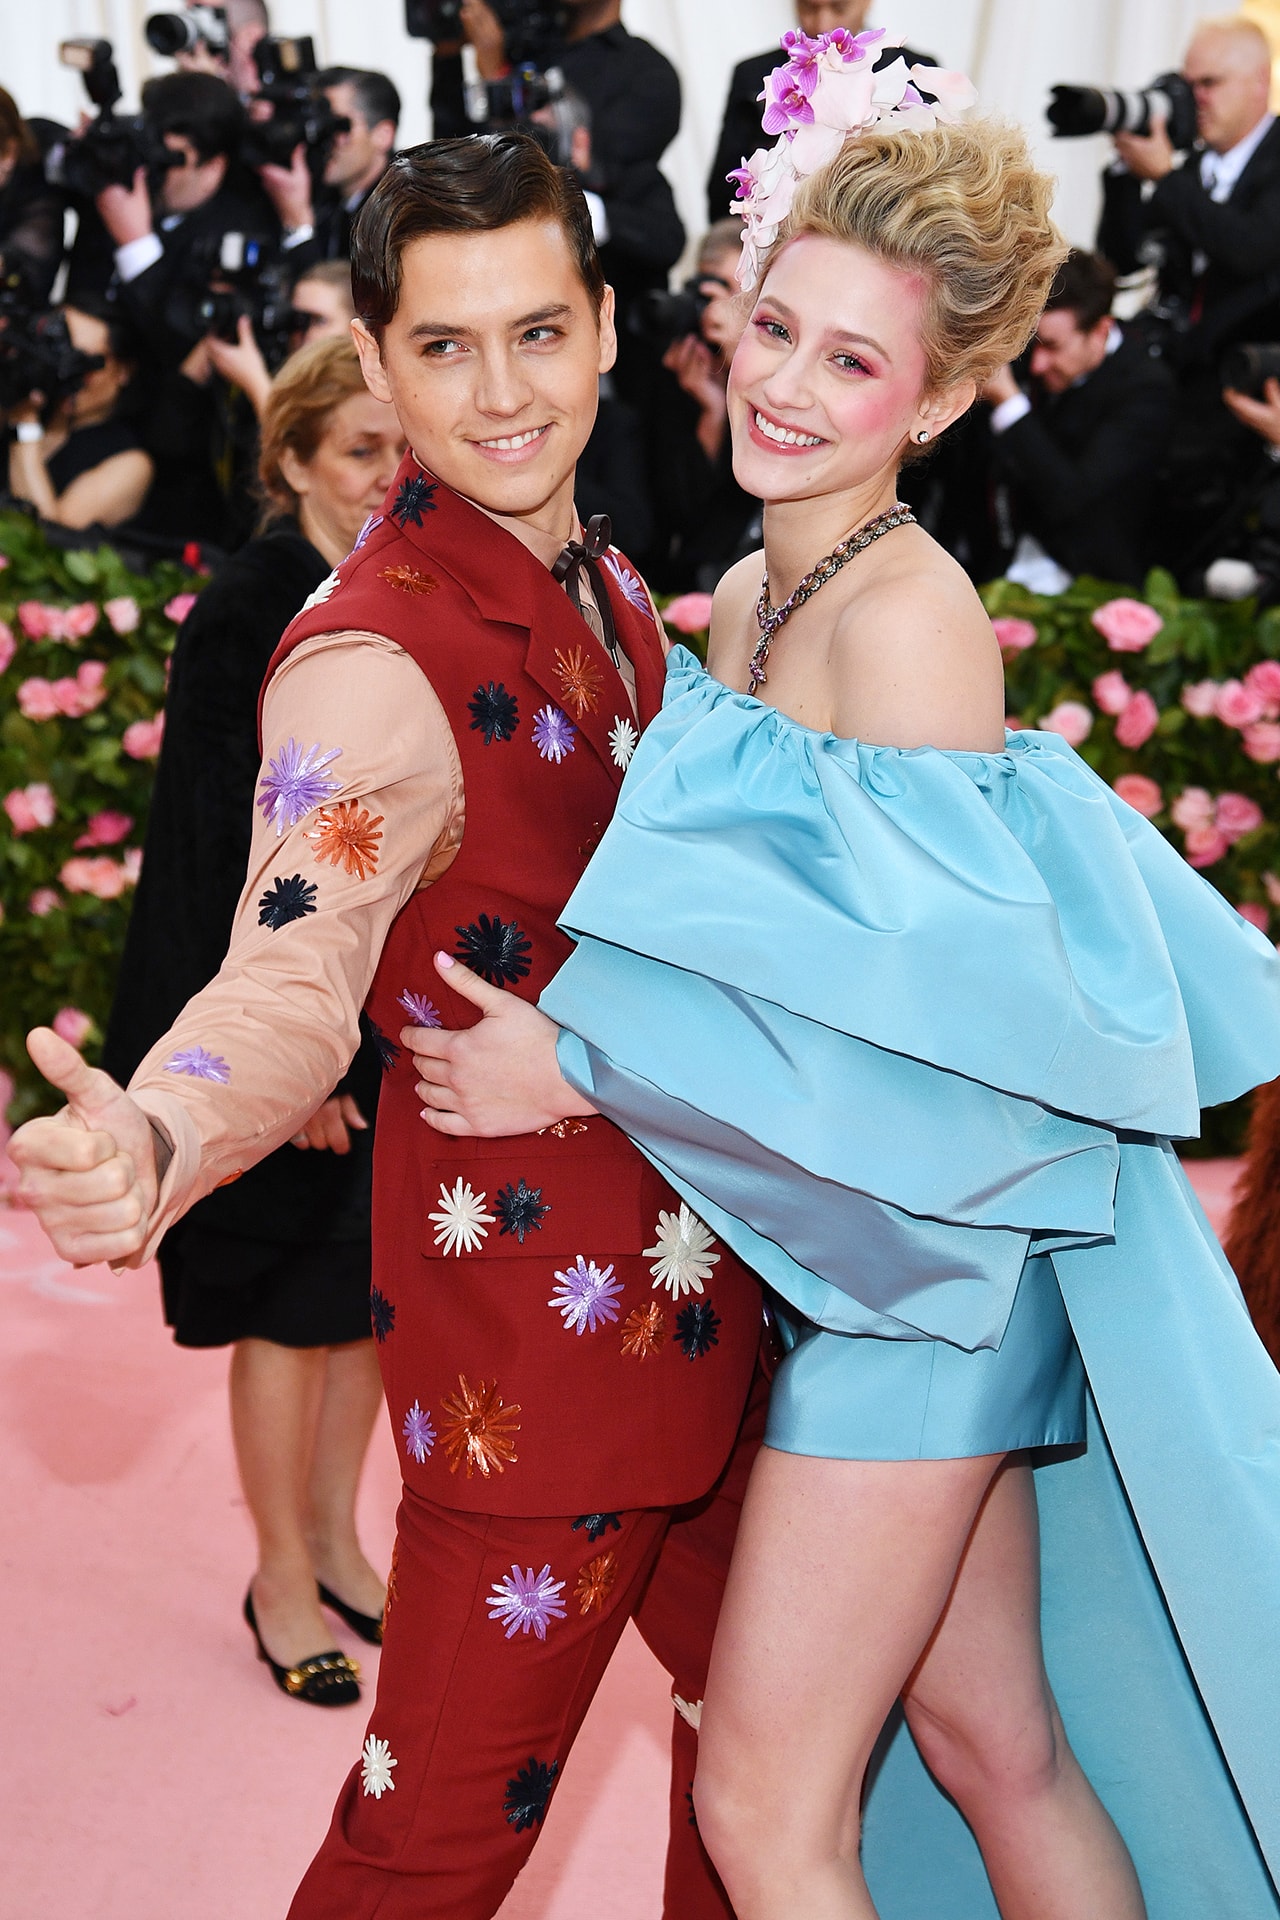 Cole Sprouse Lili Reinhart Met Gala 2019 Red Carpet Camp Notes on Fashion